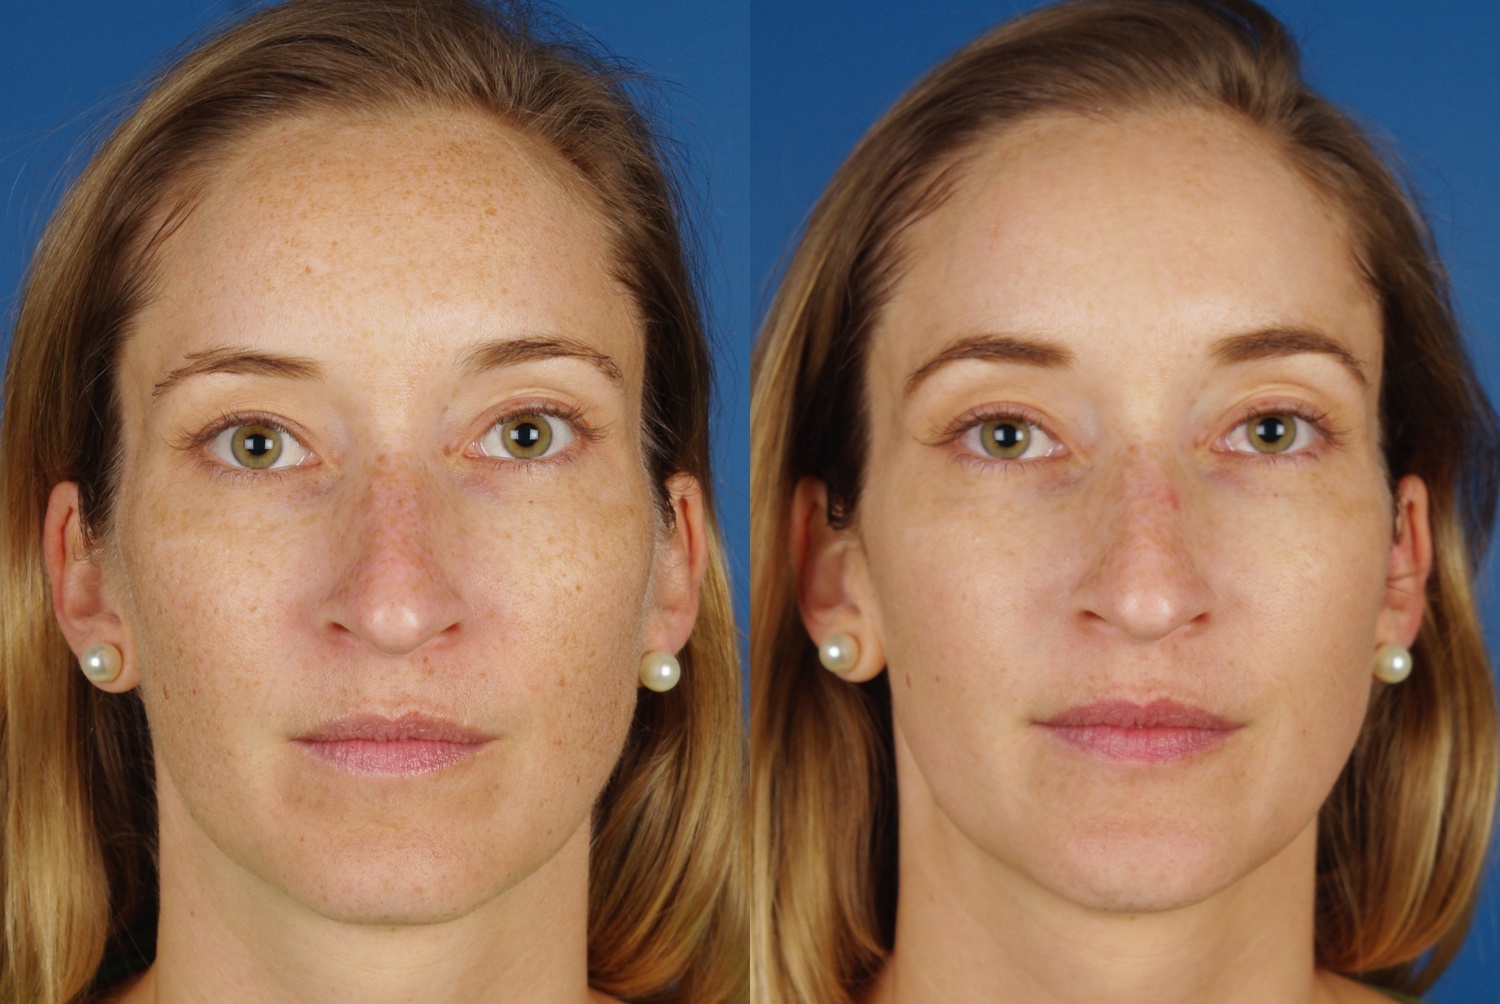 before and after example for laser skin treatments